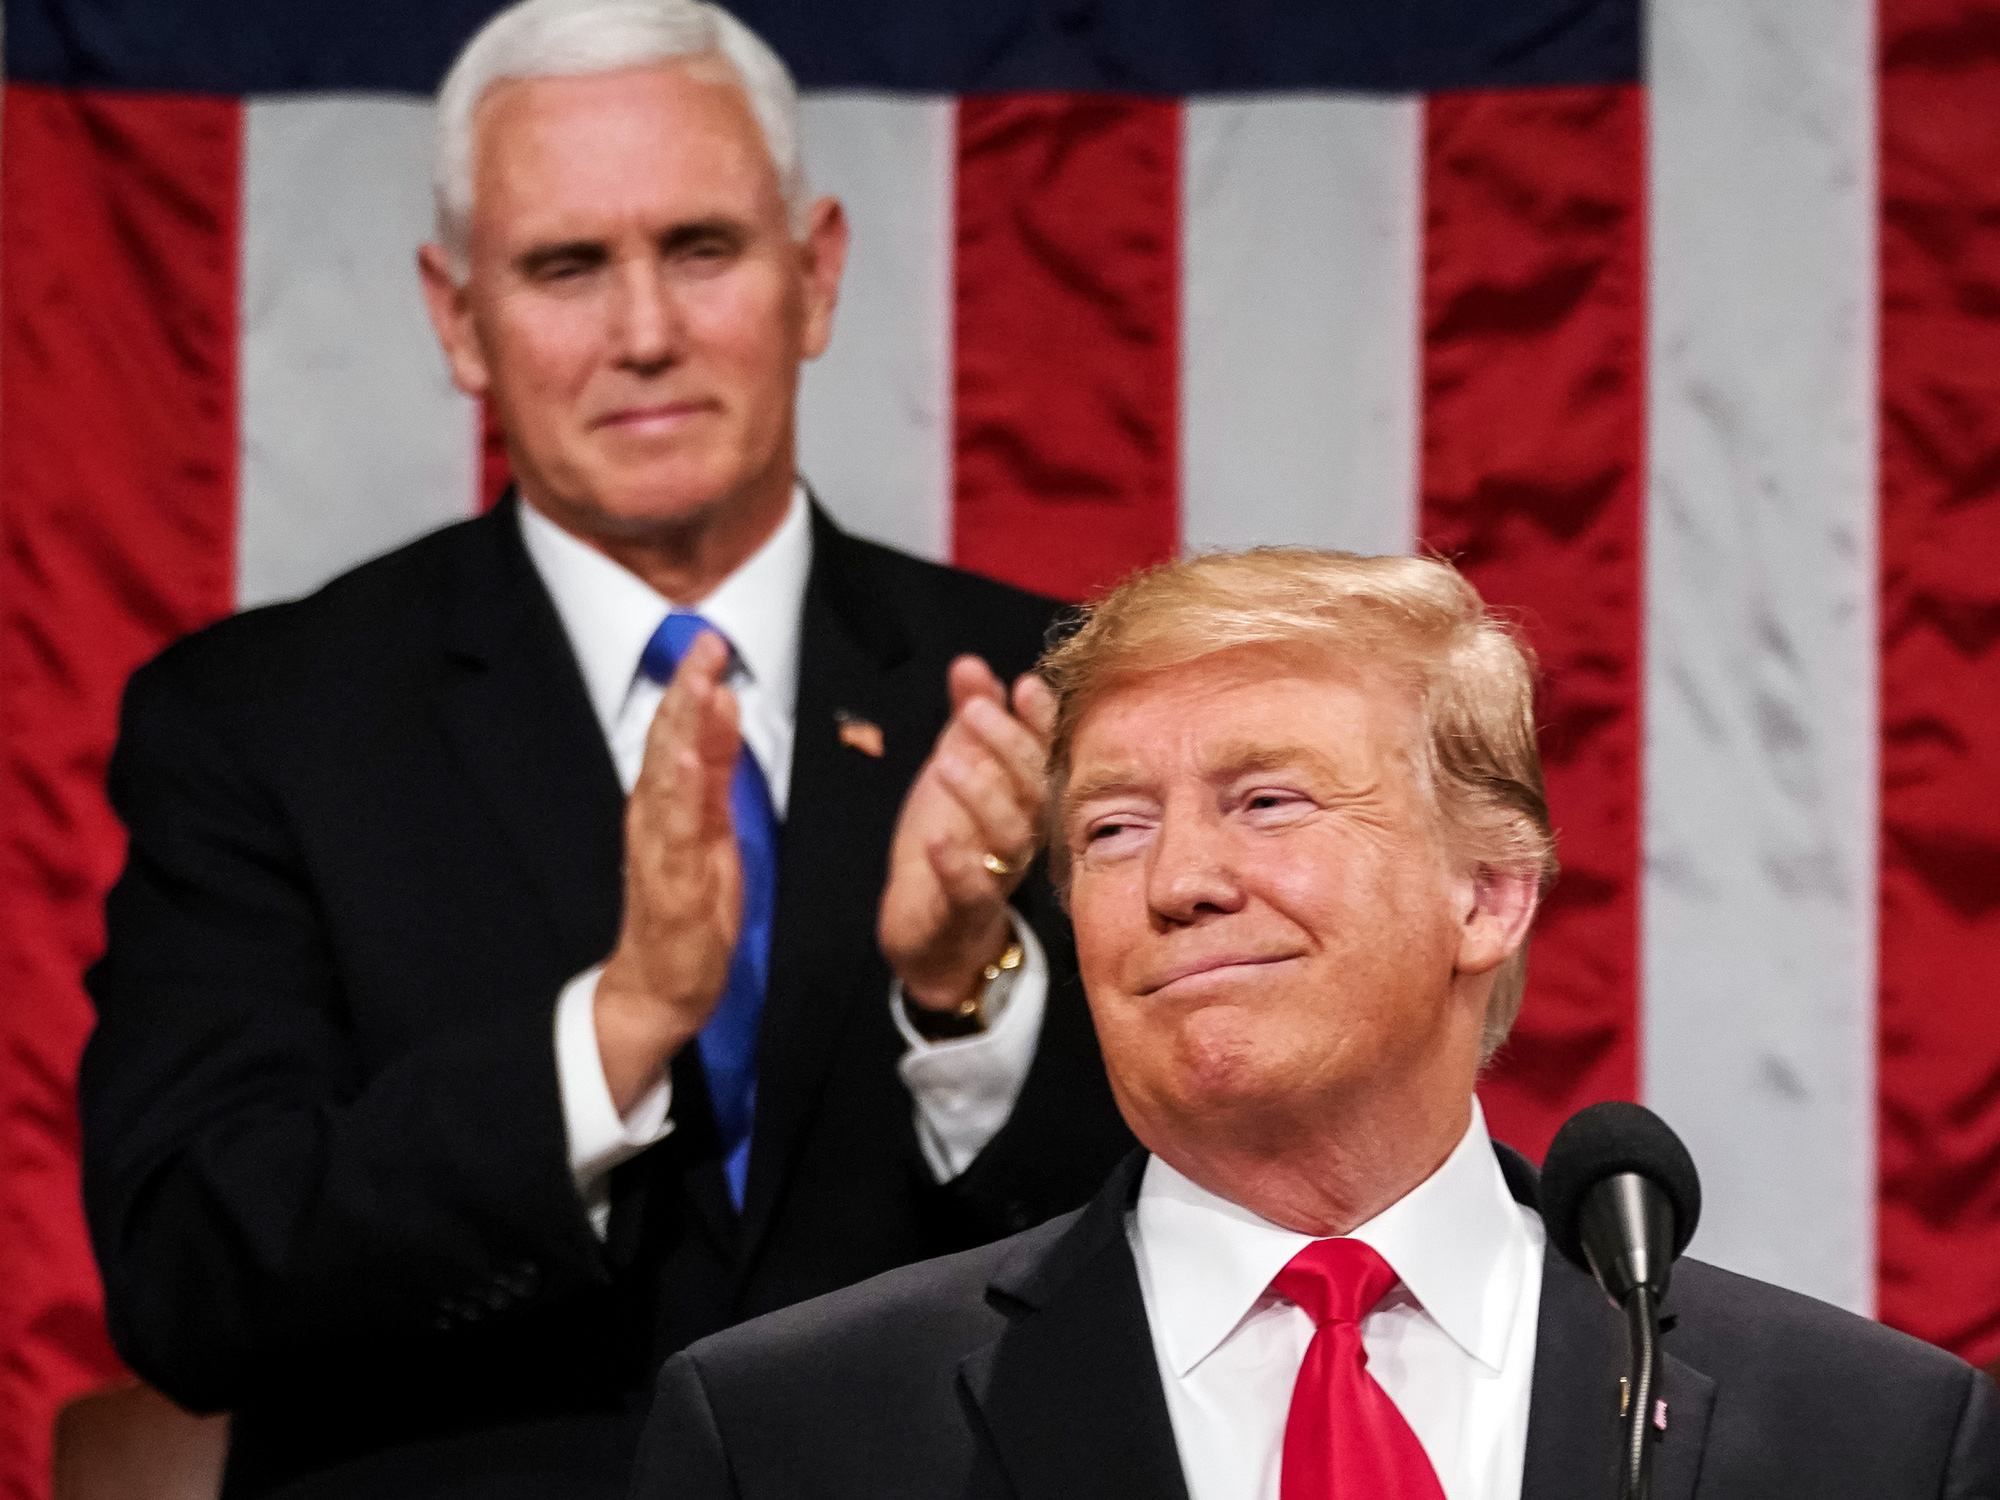 Mike Pence applauds Donald Trump during his State of the Union address in Feb. 2019.